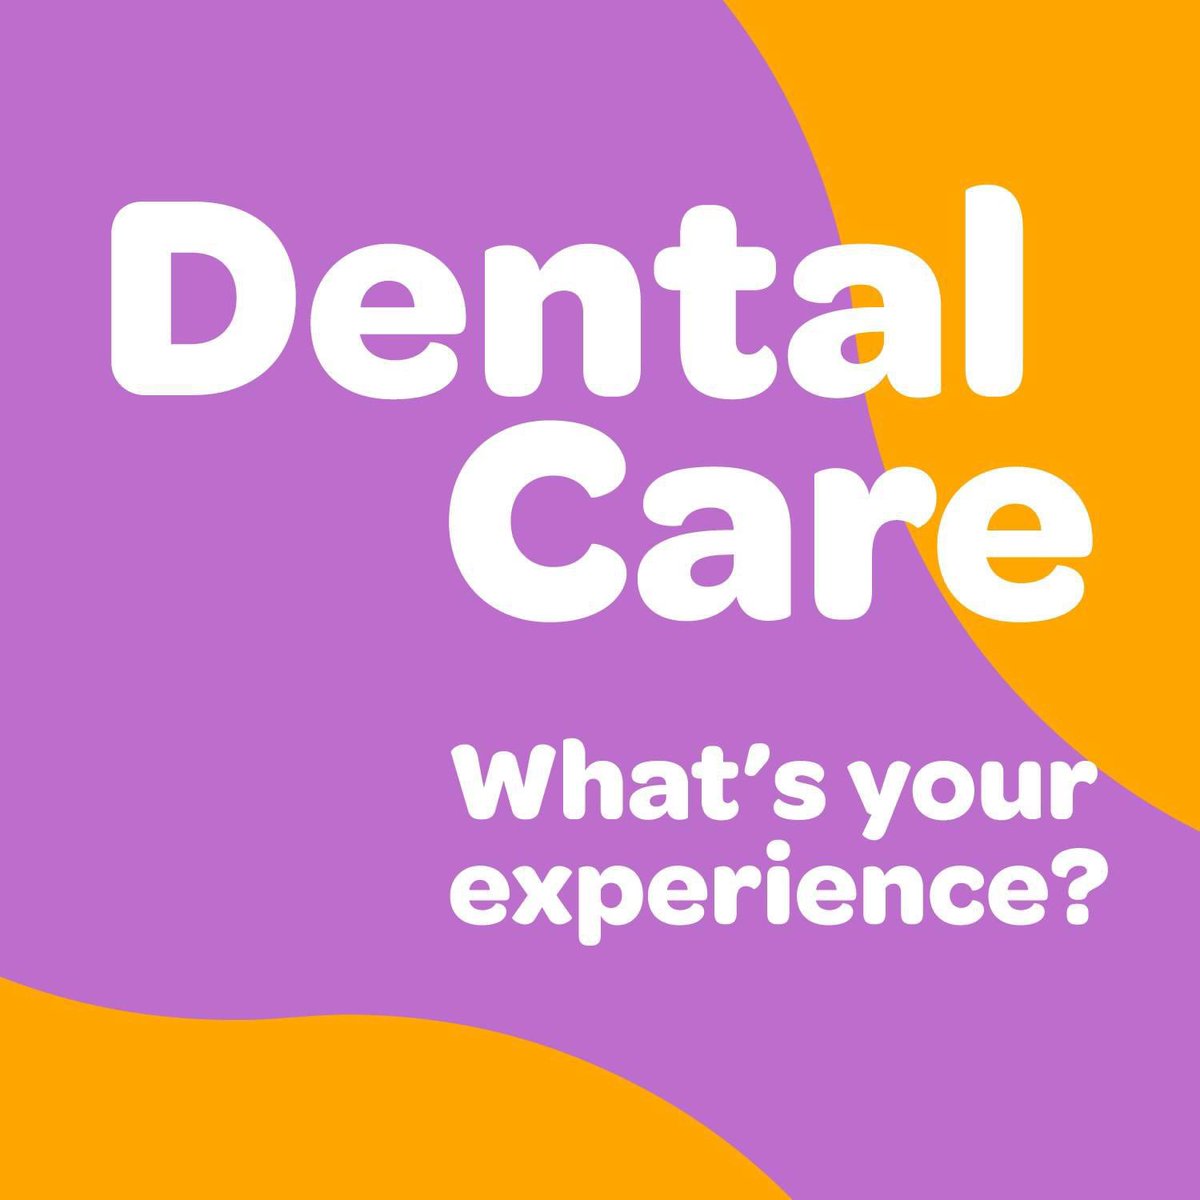 There's still time to take part in our dental survey and share your experiences of accessing dental care. We're running this survey in partnership with Nordic Pharma, who are donating £2 to the Haemophilia Society for every submission. Take part here haemophilia.org.uk/dental-care-wh…